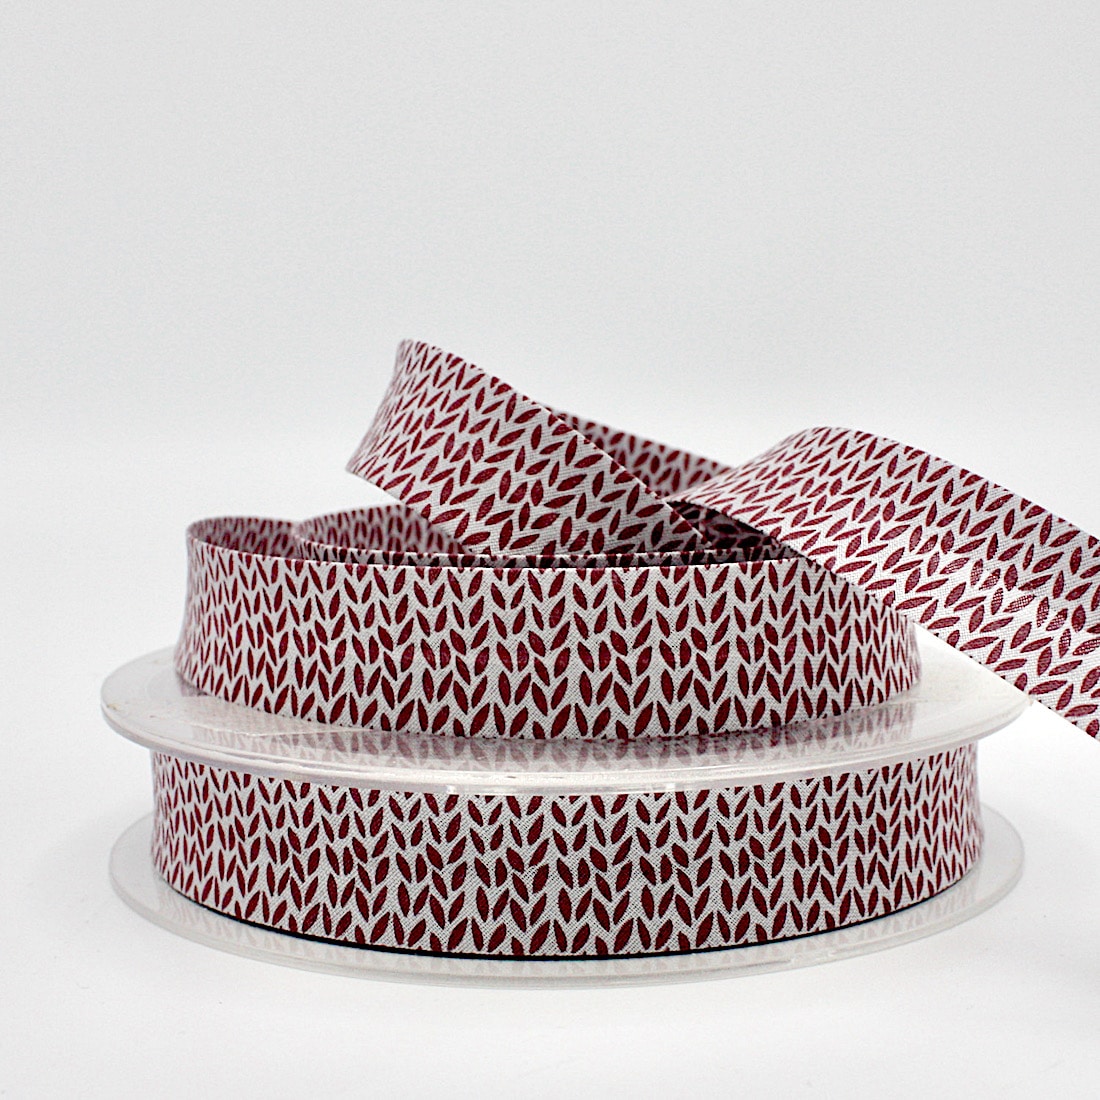 25m roll of Printed Purl Bias Binding Tape with 18mm width in Mulberry